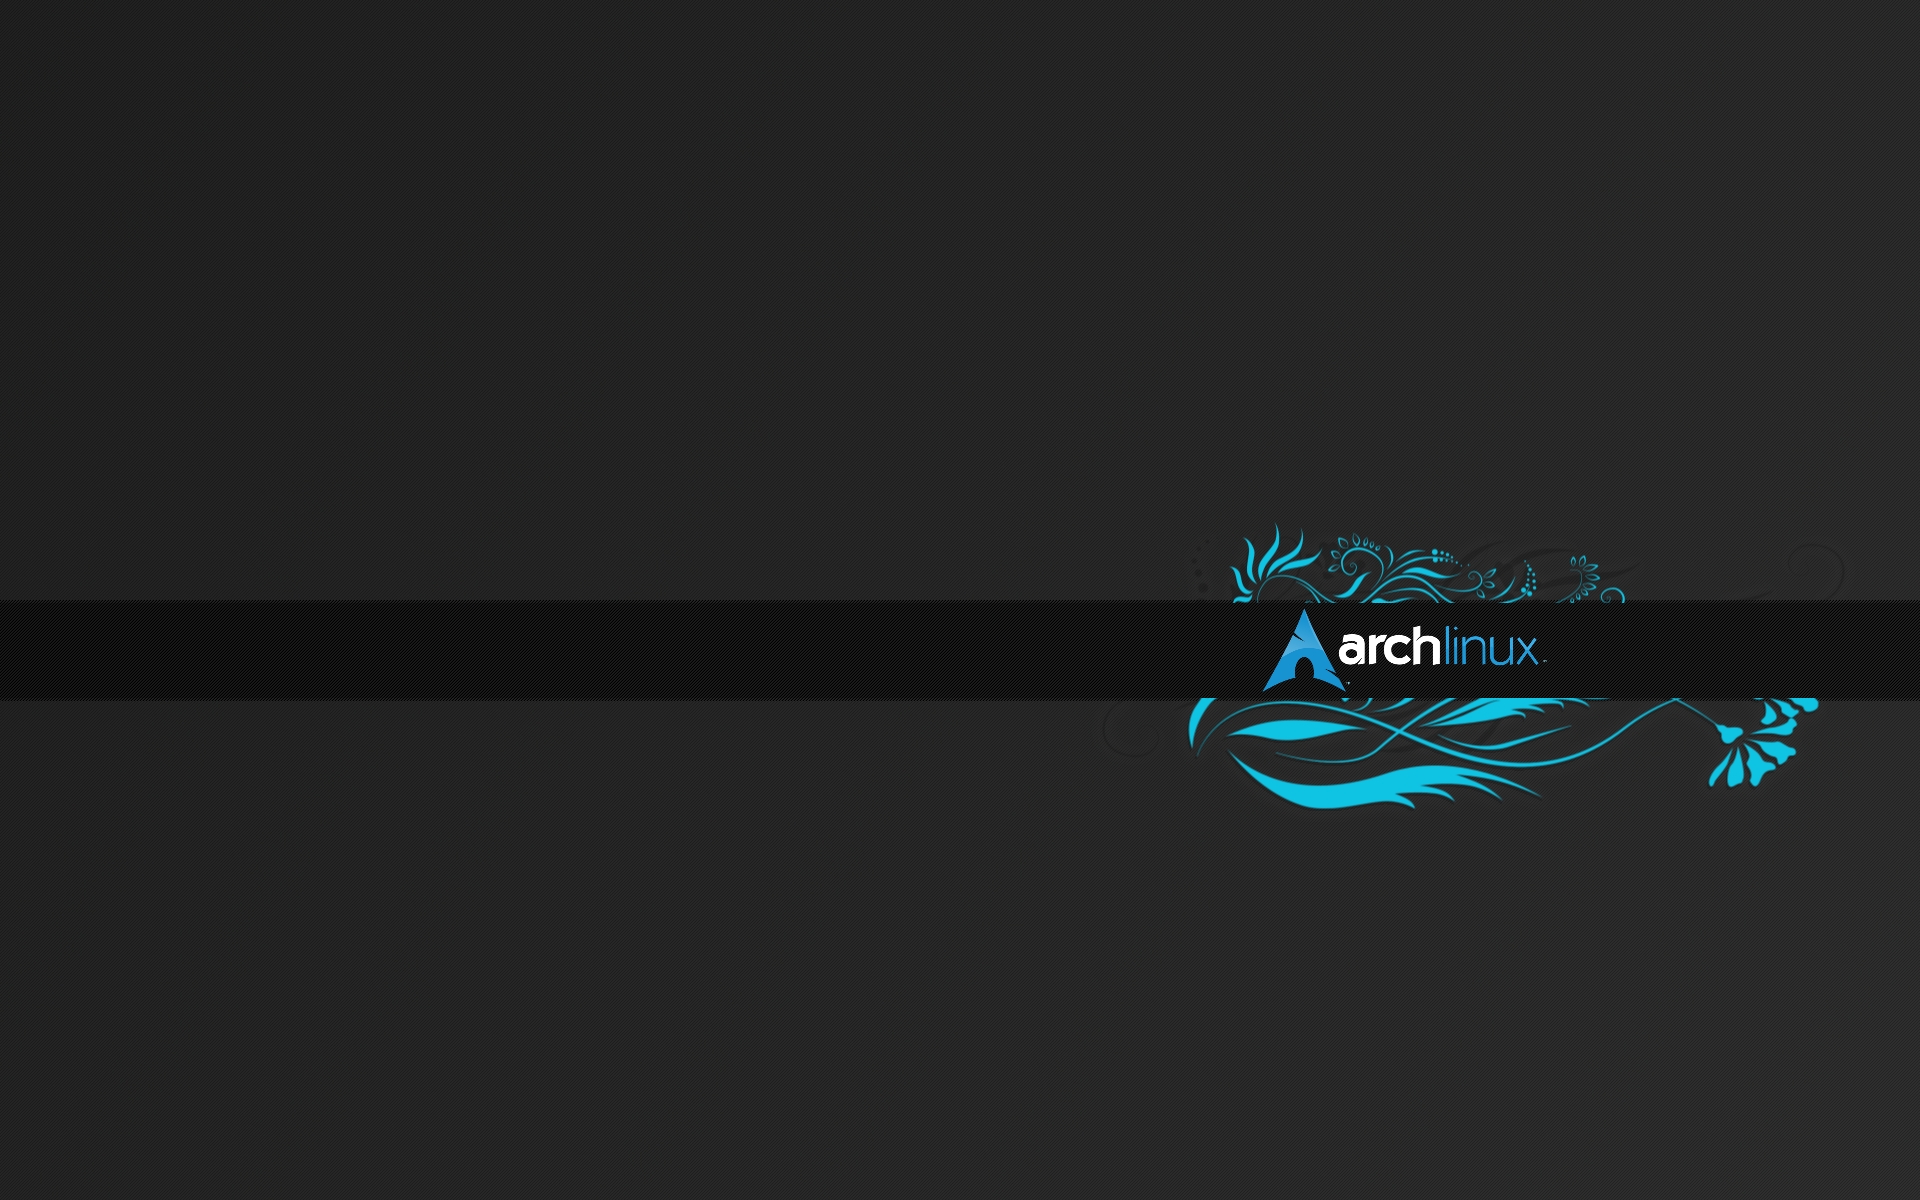 Free download cool background picture linux similar website email background [1920x1200] for your Desktop, Mobile & Tablet. Explore Black Arch Linux Wallpaper. Linux Desktop Wallpaper, HD Linux Wallpaper Download